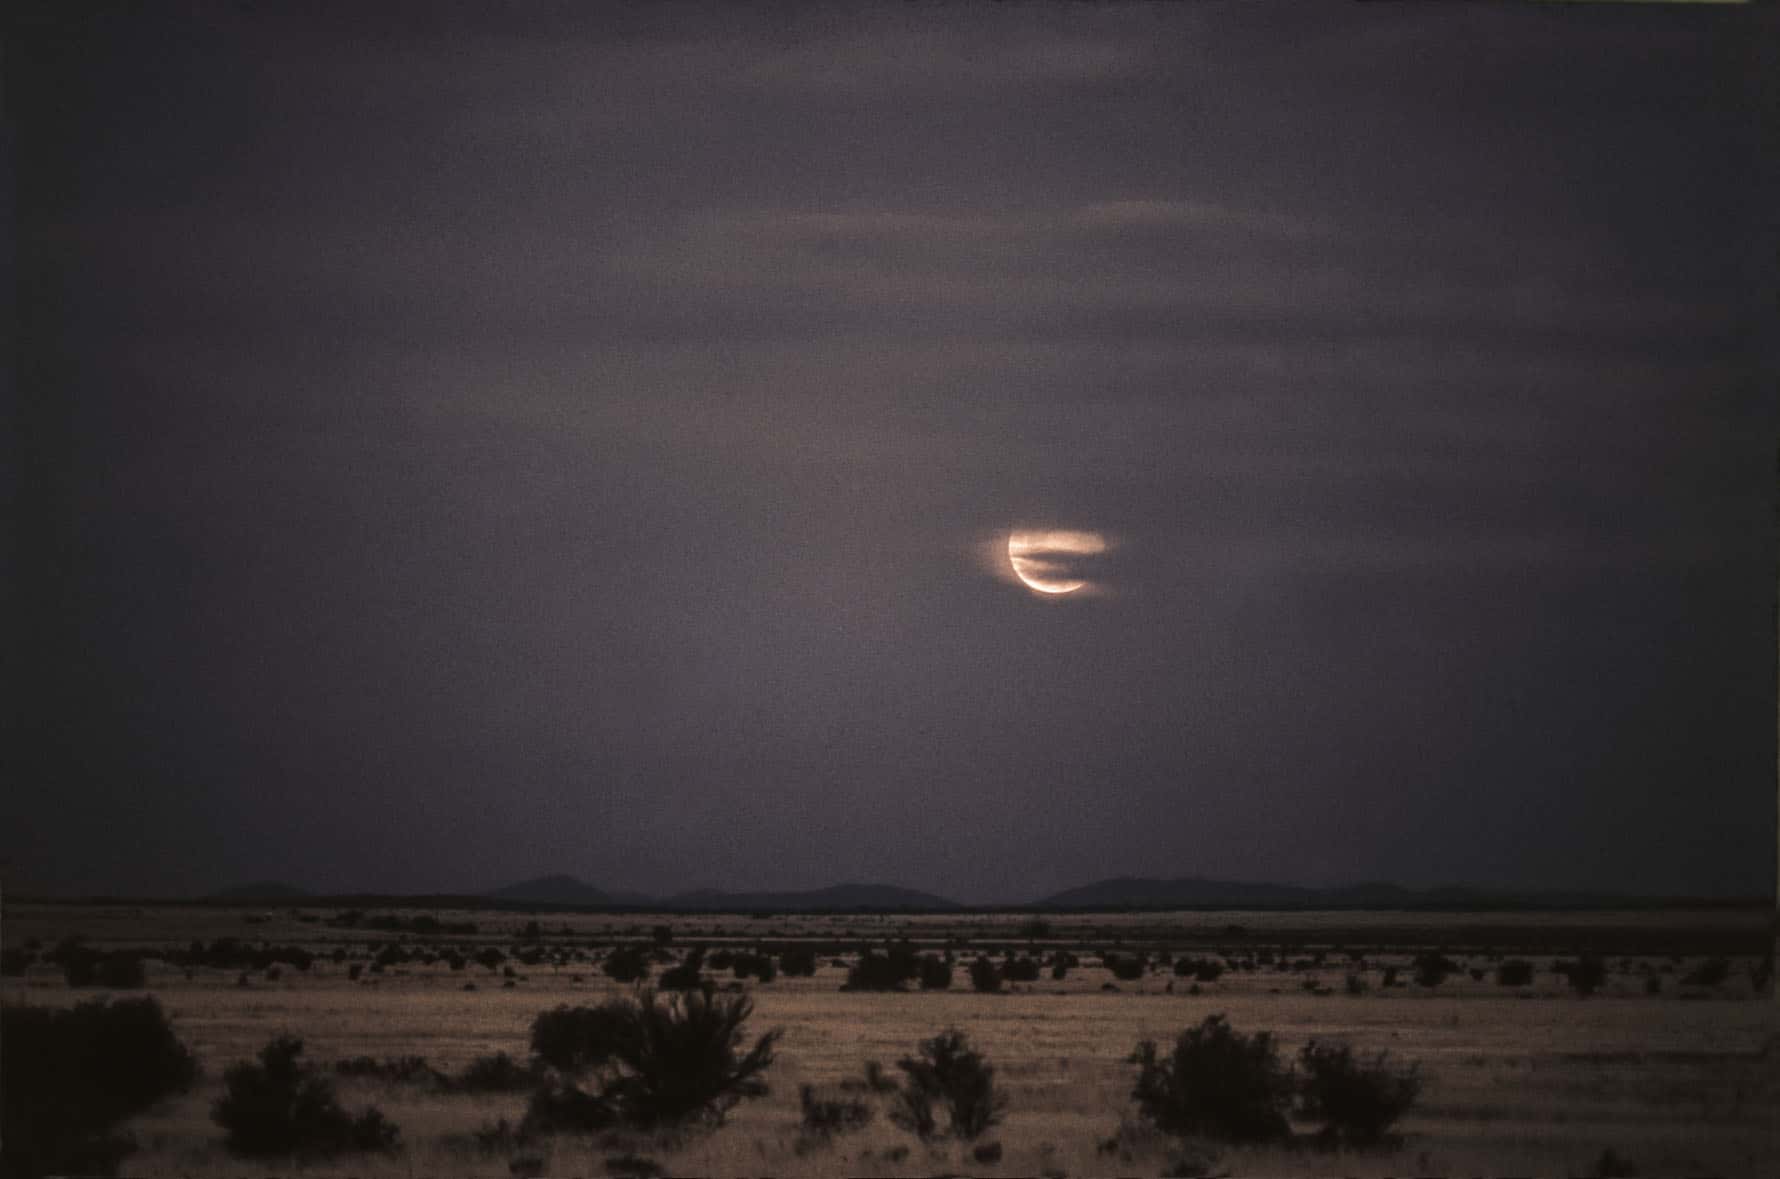 Moon, Midnorth, South Australia 1981, Kate Breakey, Catherine Couturier Gallery